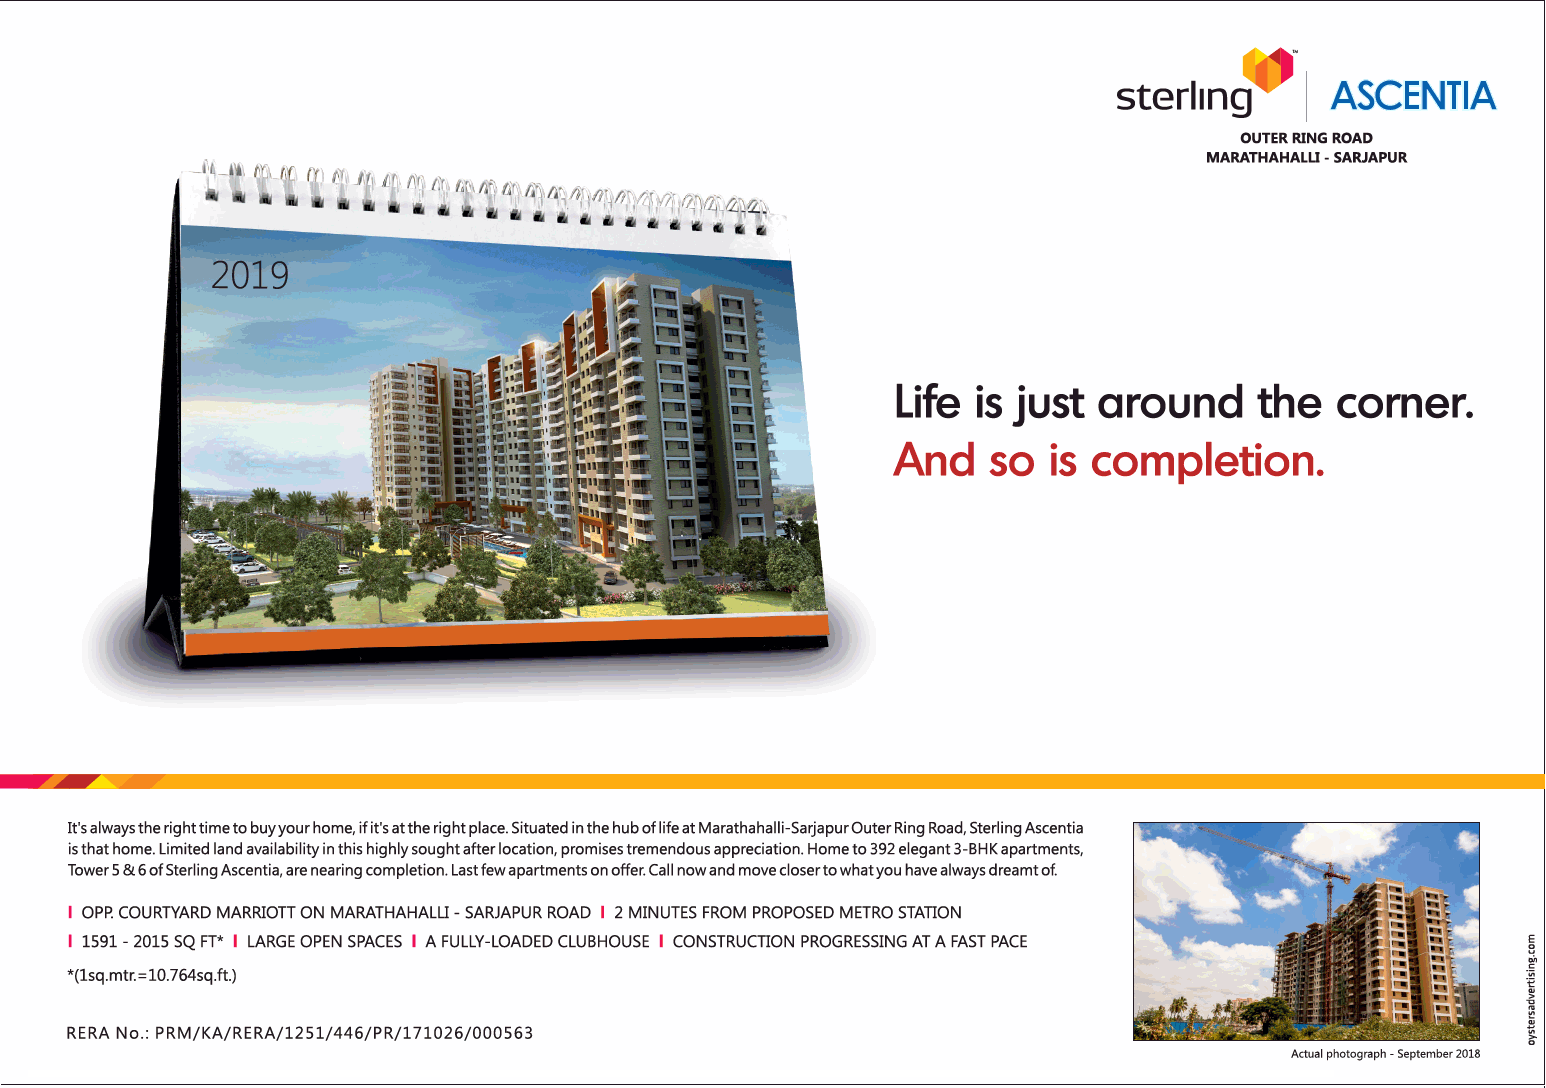 Grab the right time to buy your home at Sterling Ascentia in Bangalore Update